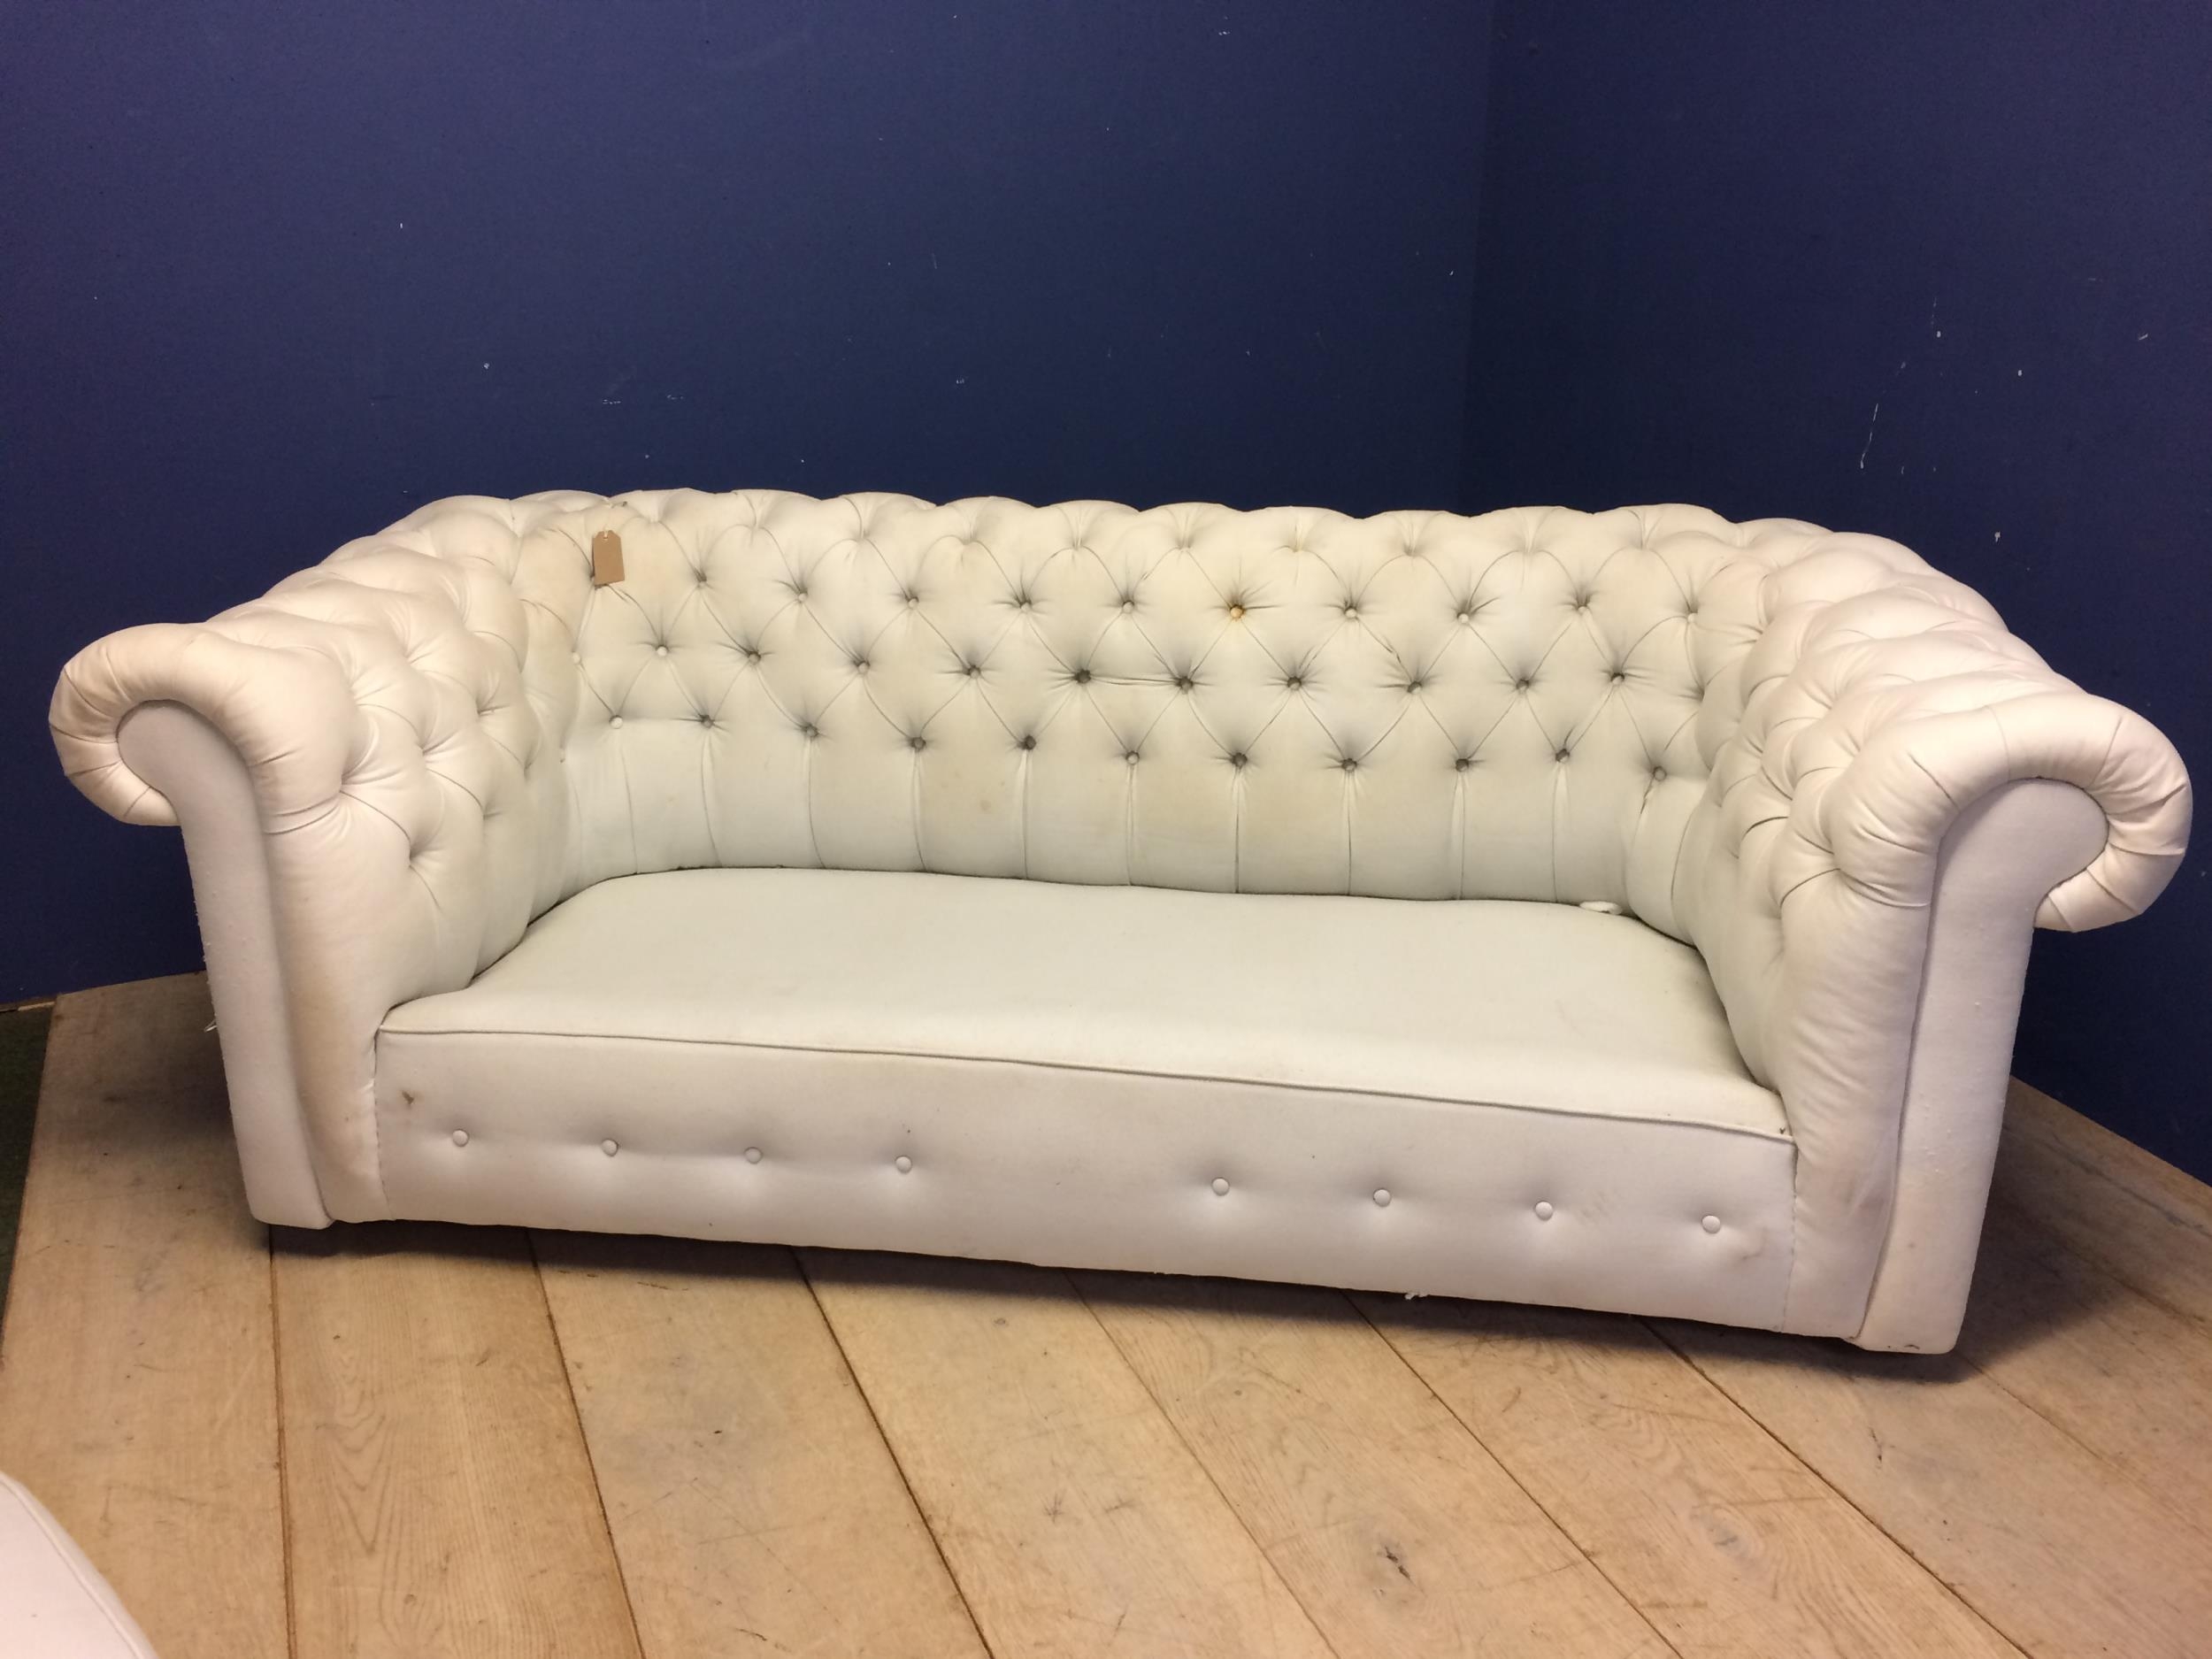 Victorian chesterfield sofa, upholstered in a light coloured fabric (some areas grubby with marks, - Image 5 of 5